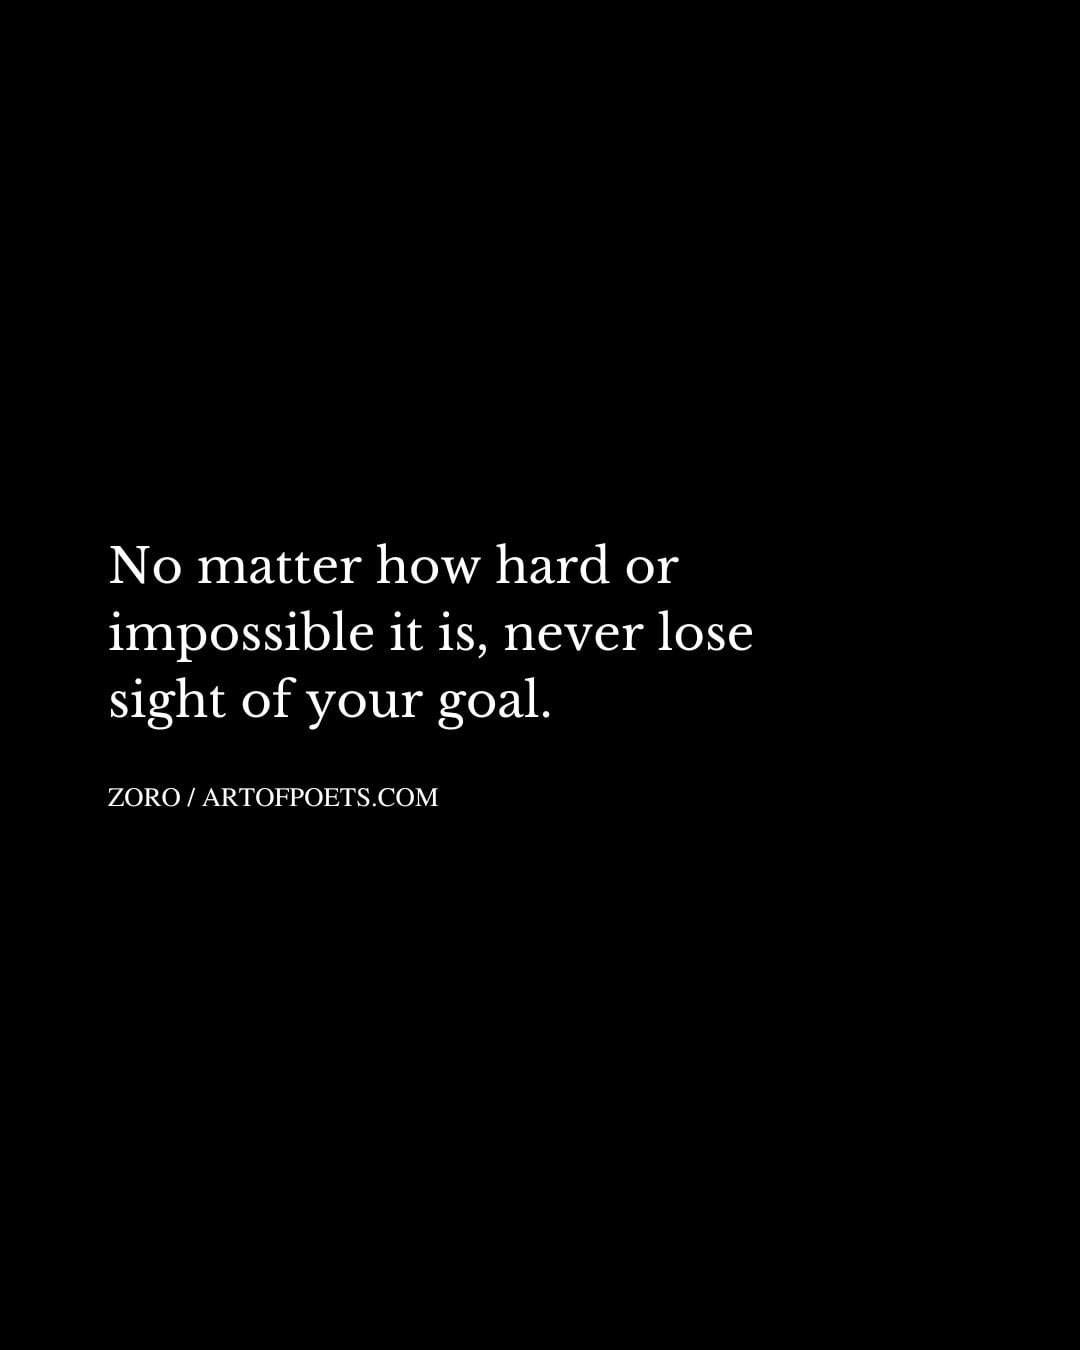 No matter how hard or impossible it is never lose sight of your goal